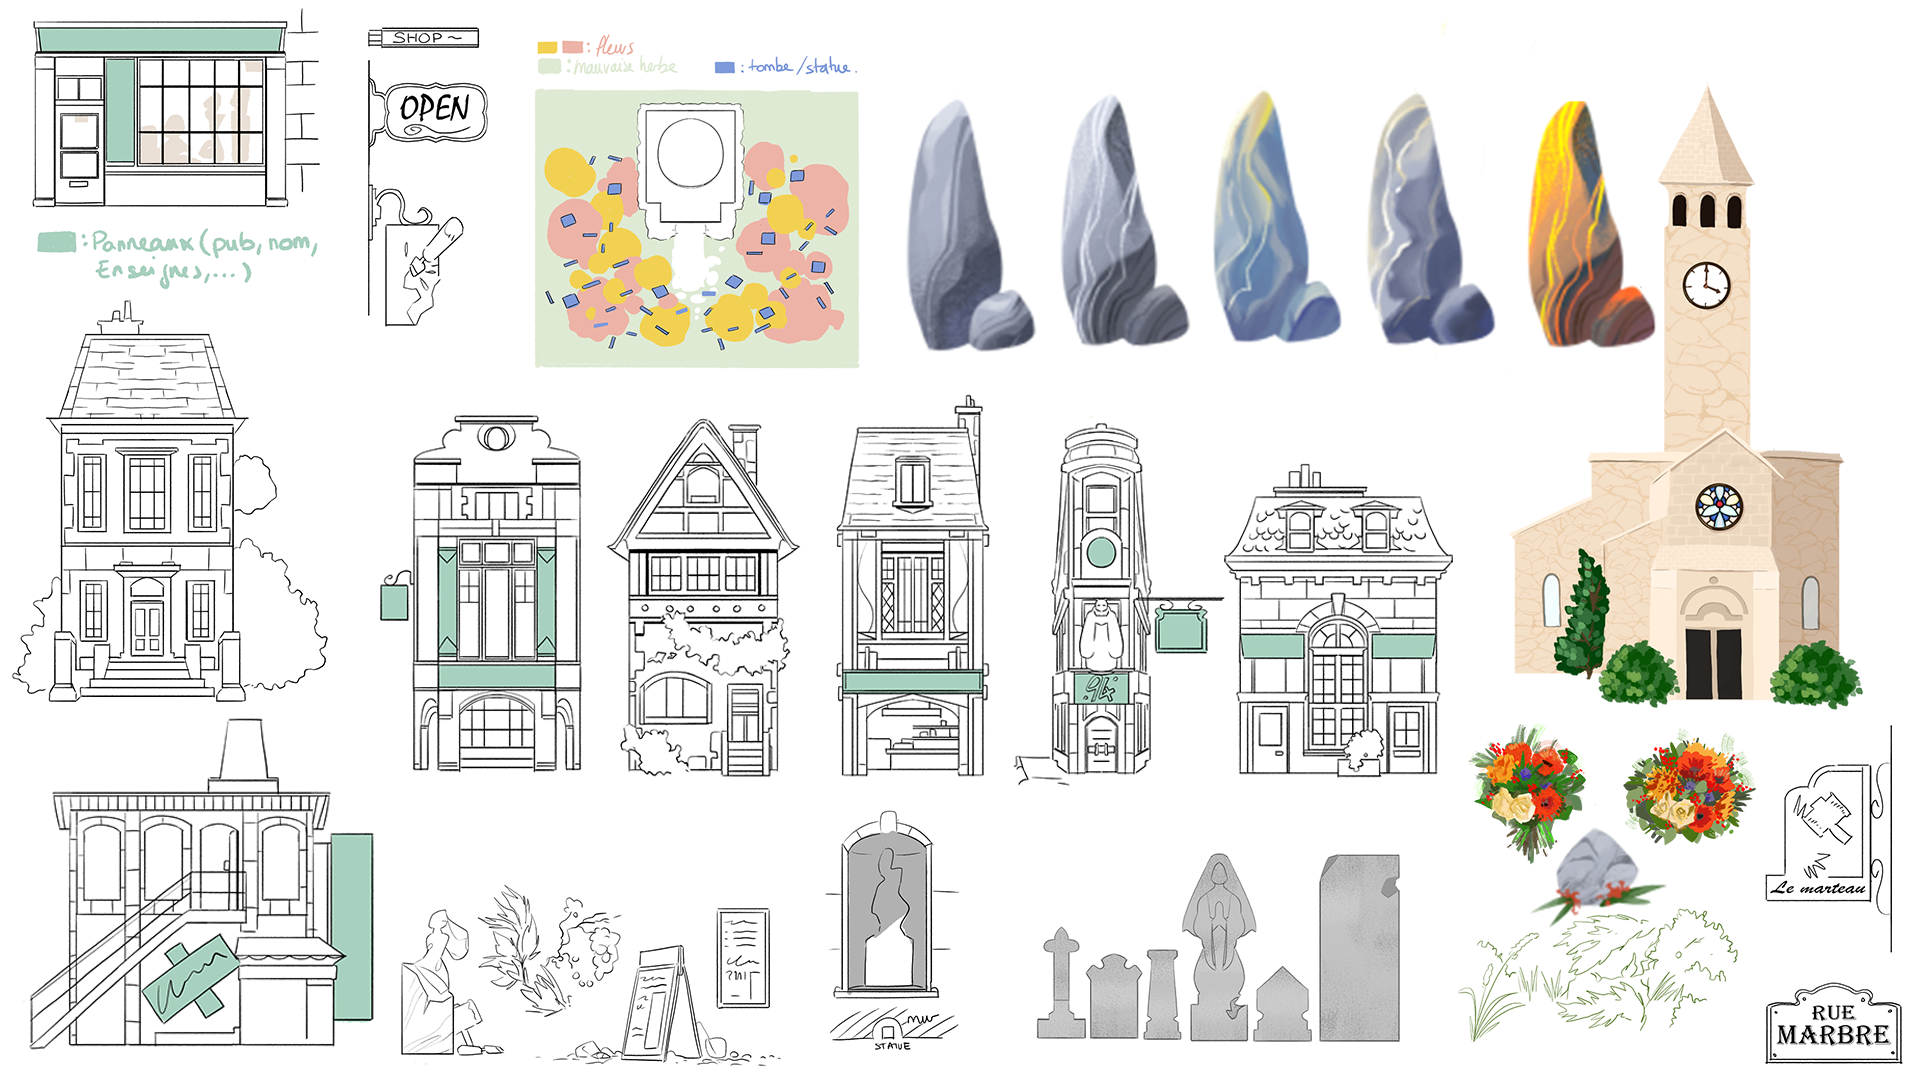 Concept art page of the backgrounds elements of the film. On the left are building facades of the 19th century, as well as signs and elements to be found in the street. On the top are rocks and a map of the temps. On the left is a front view of the church.